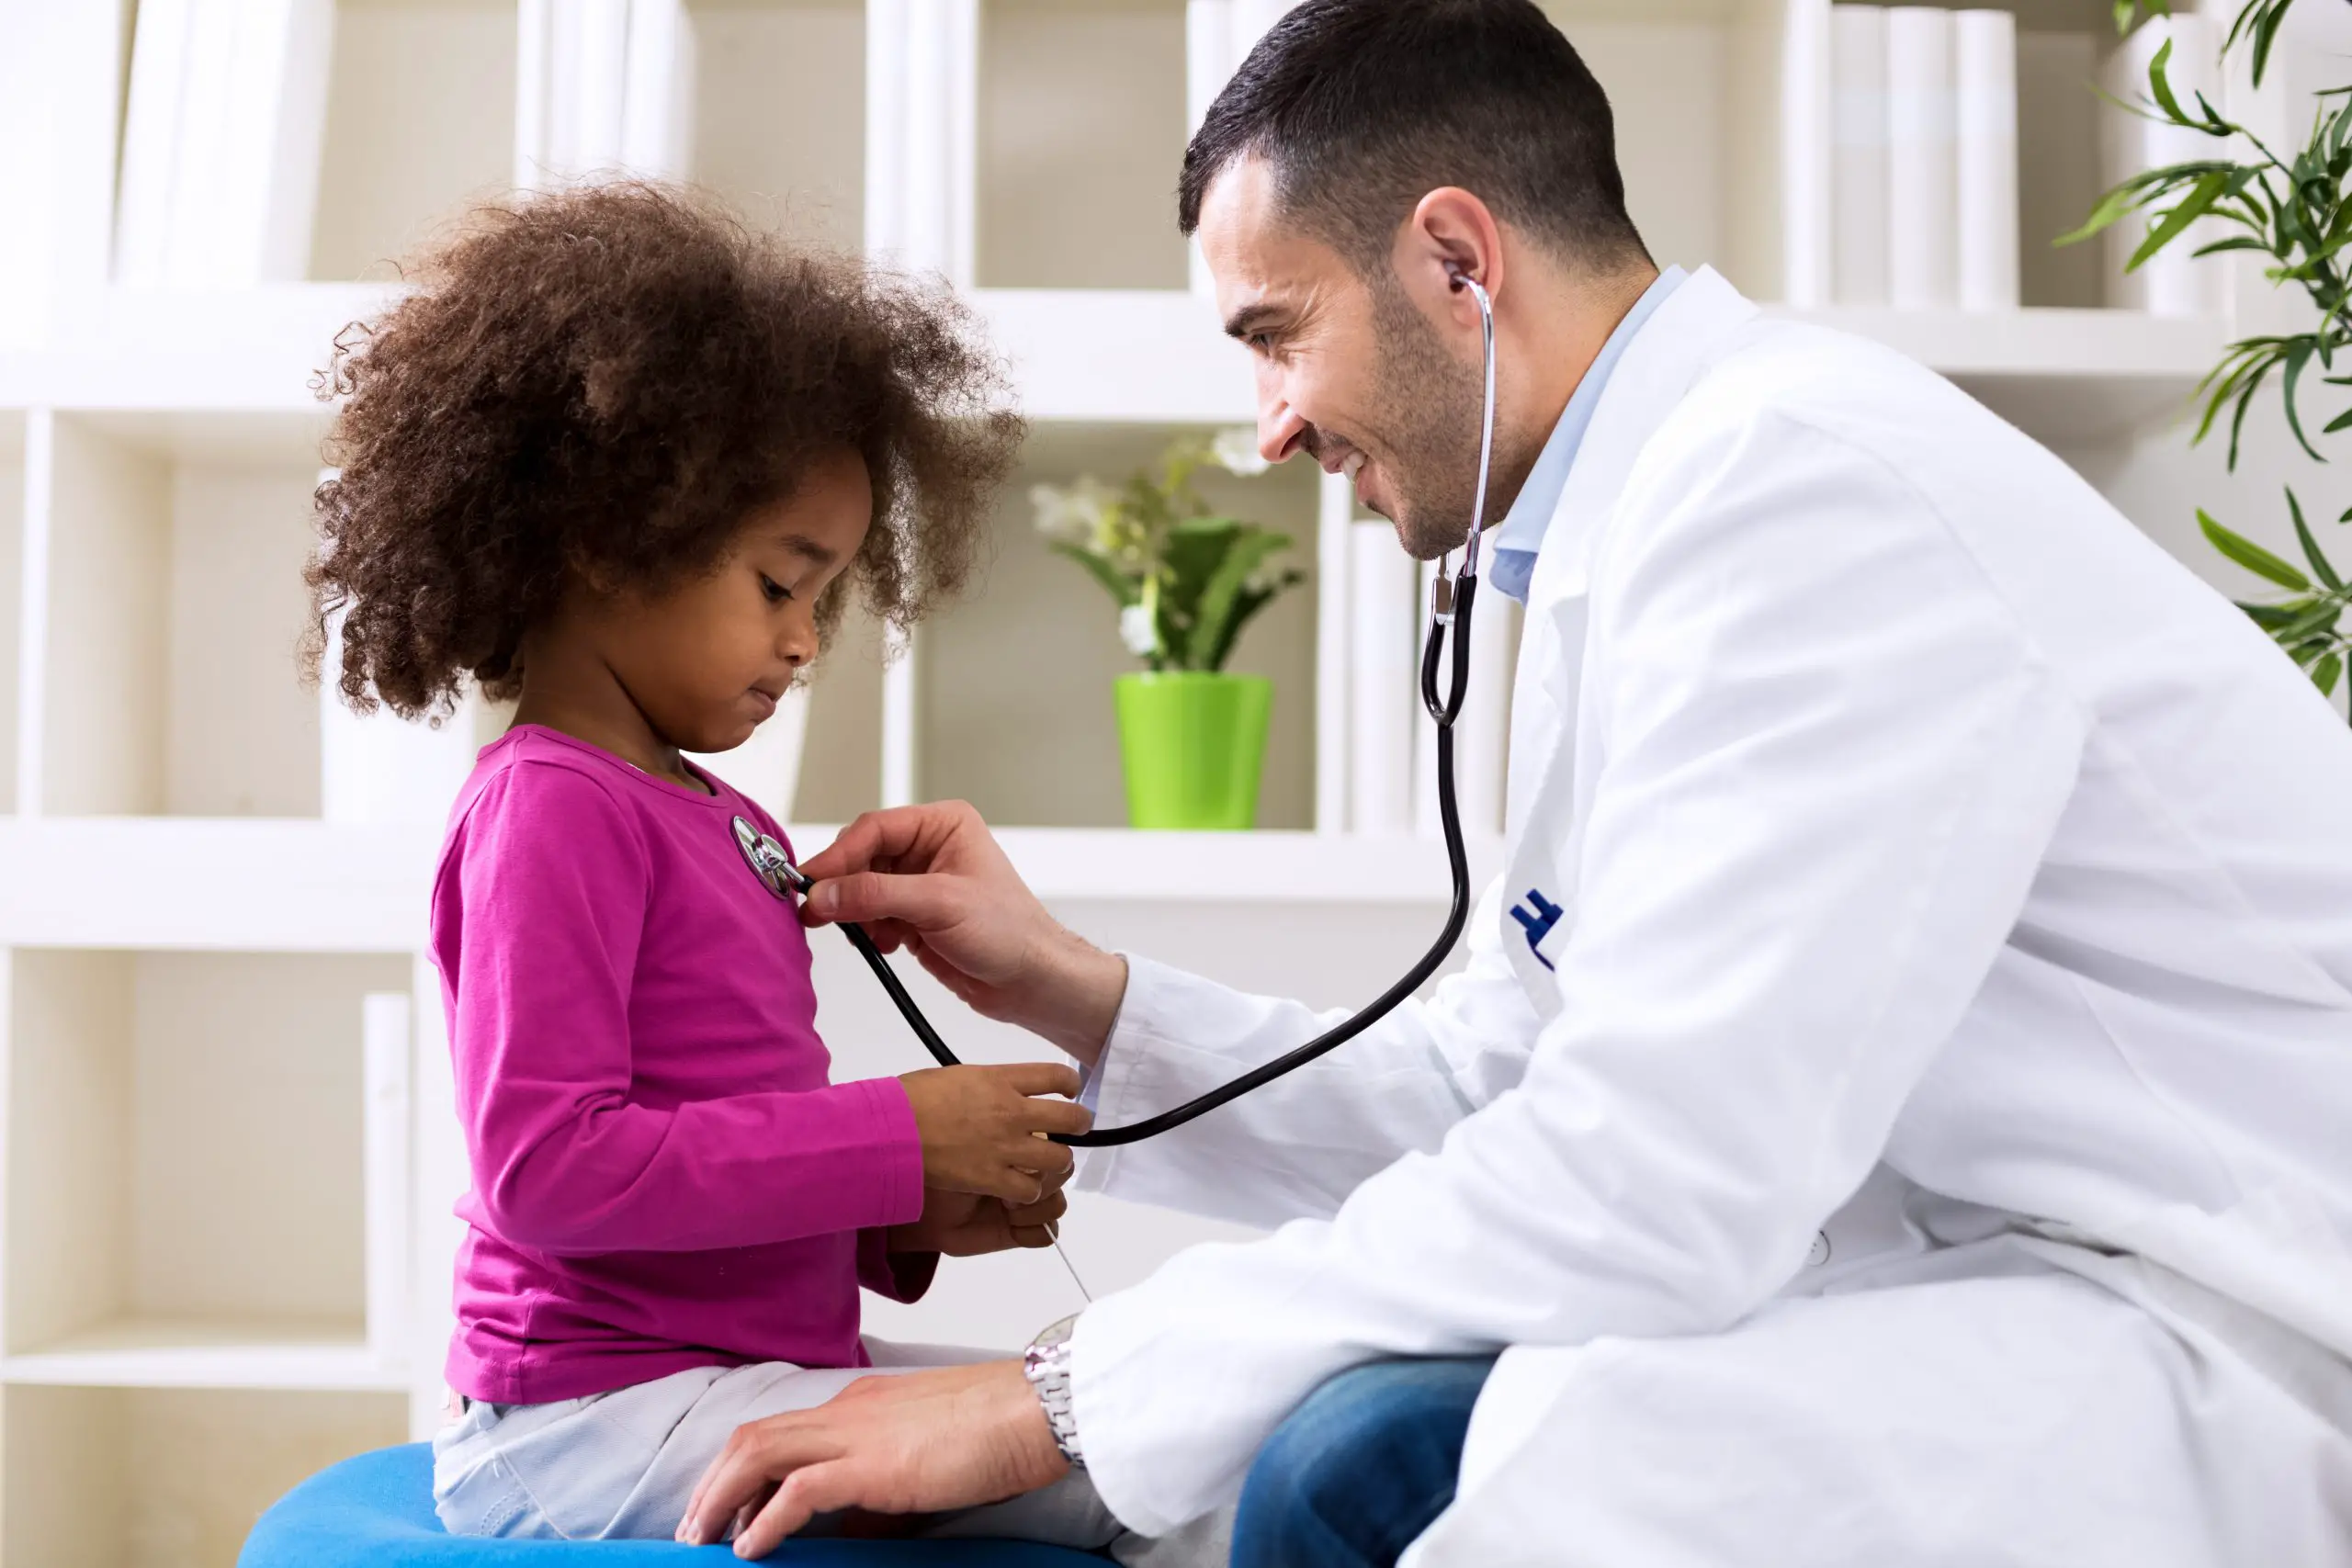 doctor uses stethoscope on young patient